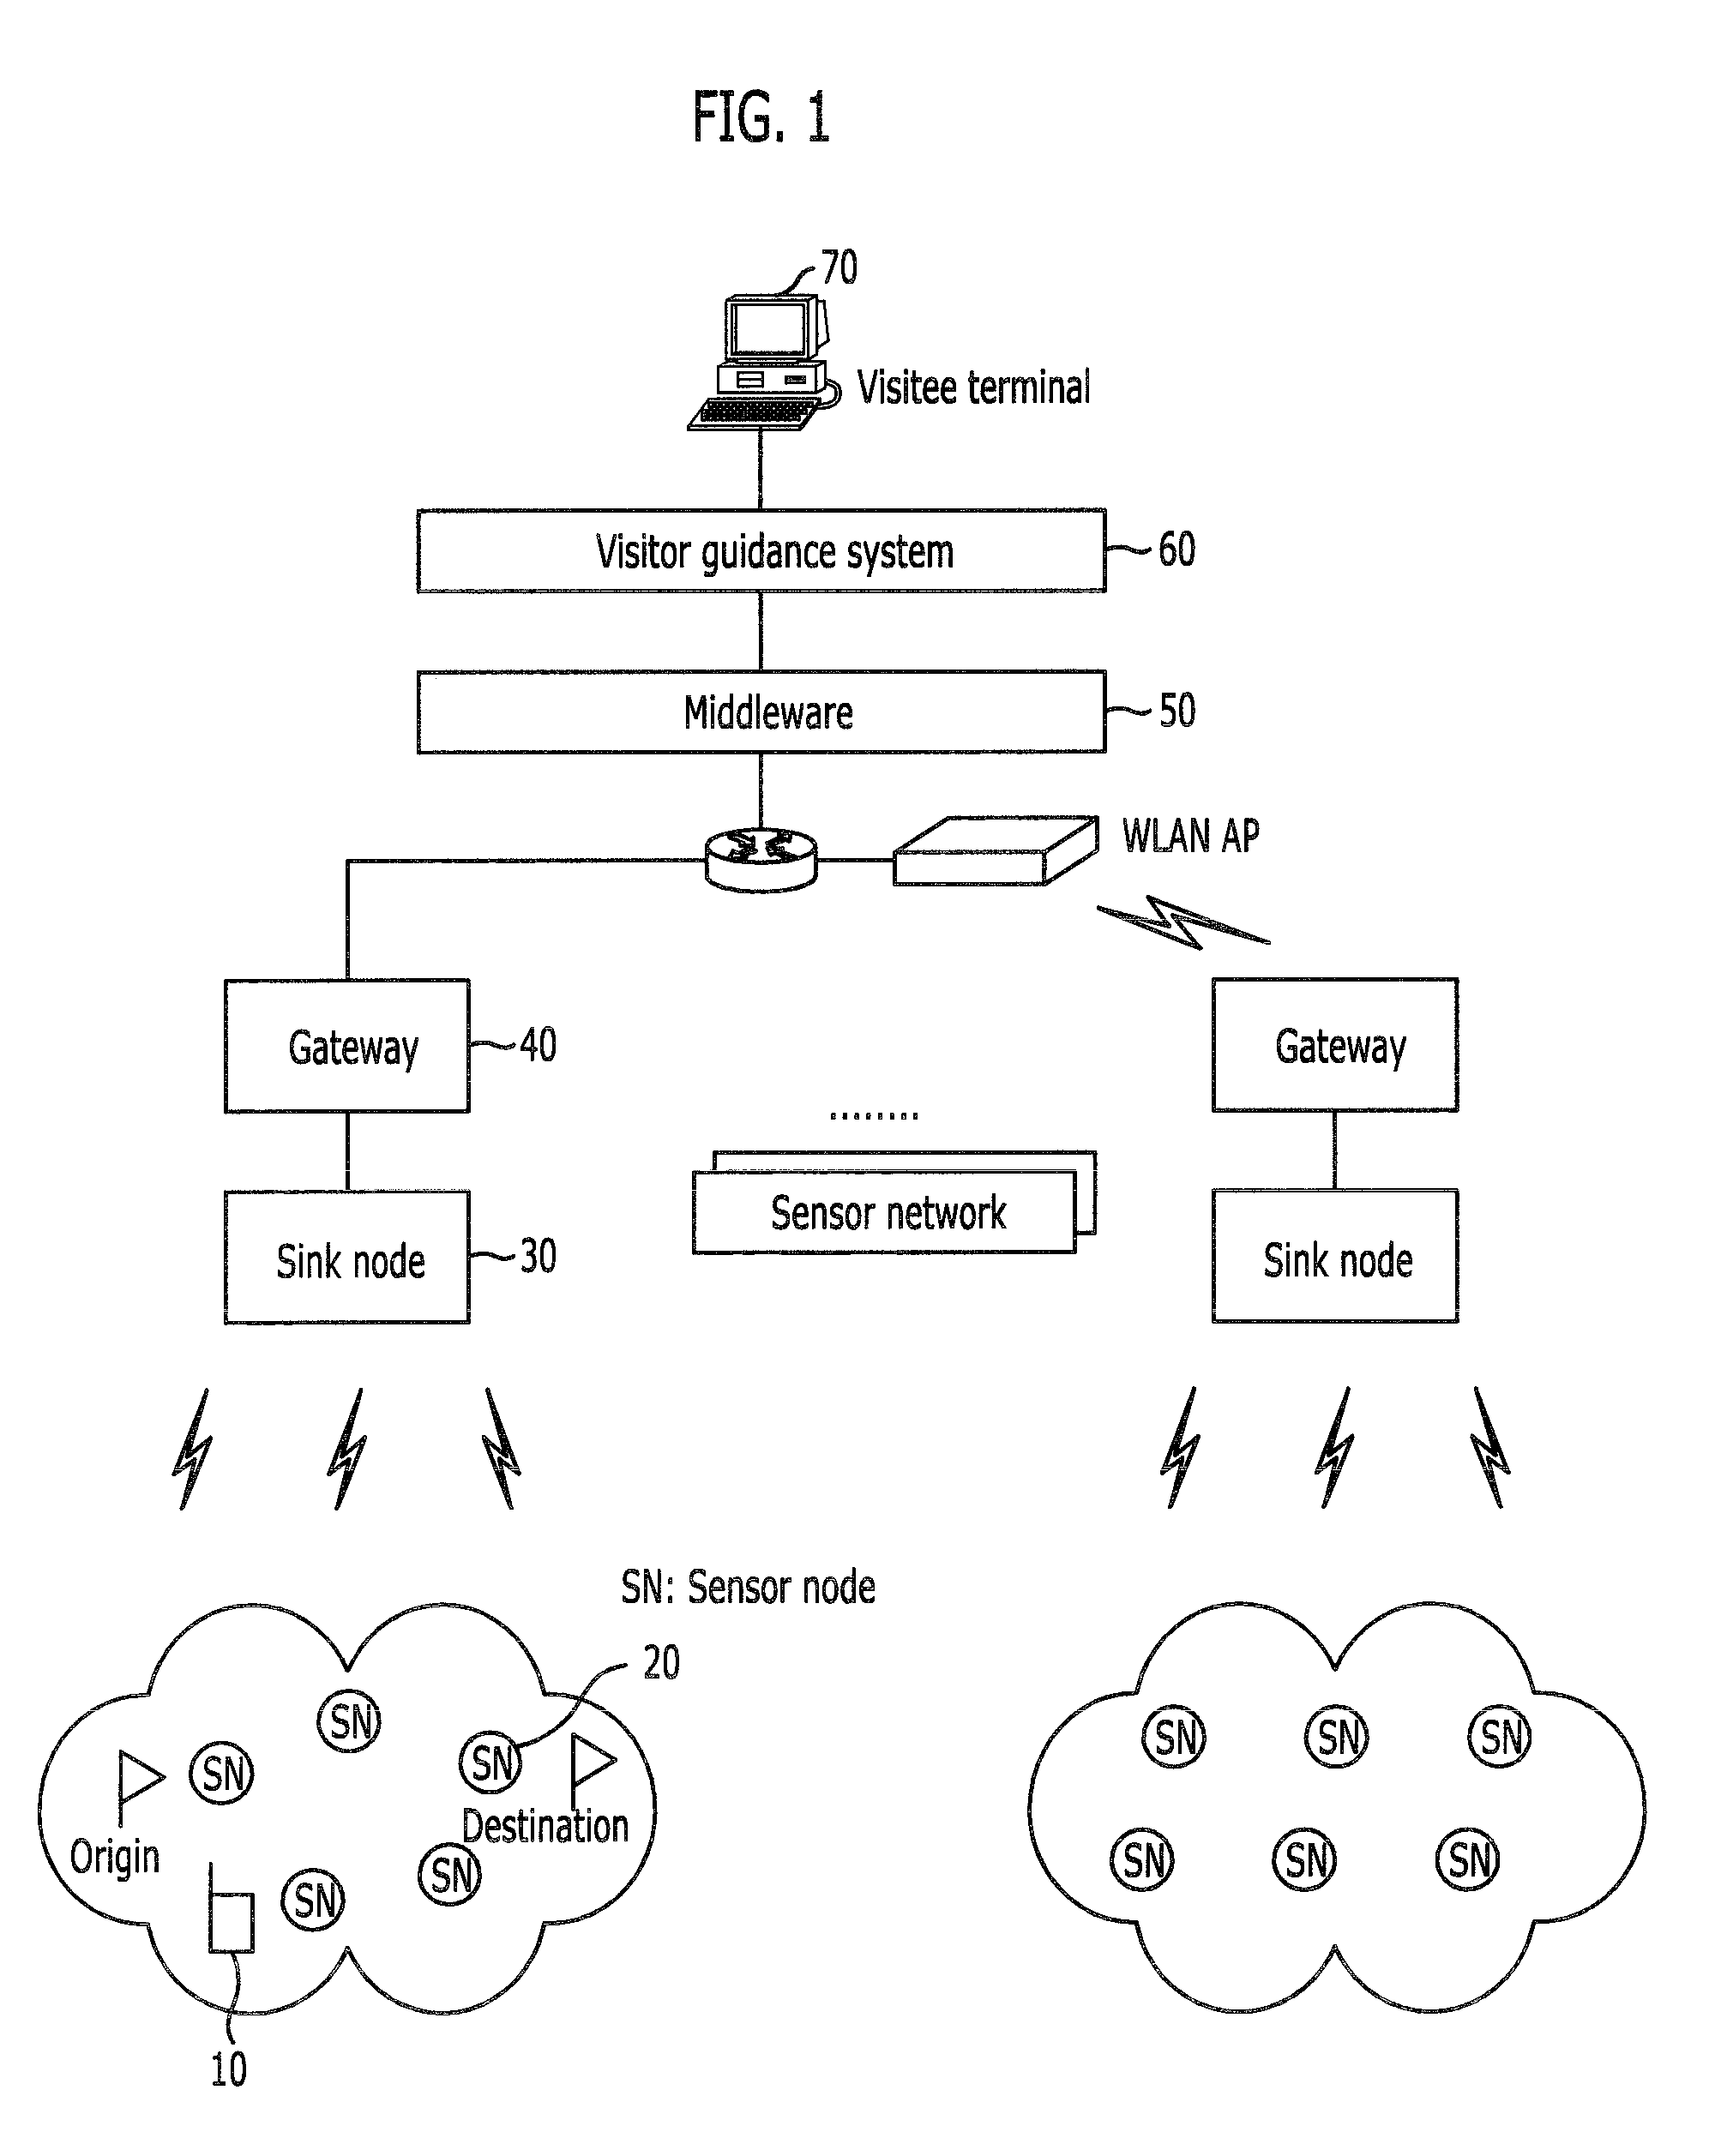 System and method for guiding visitor using sensor network